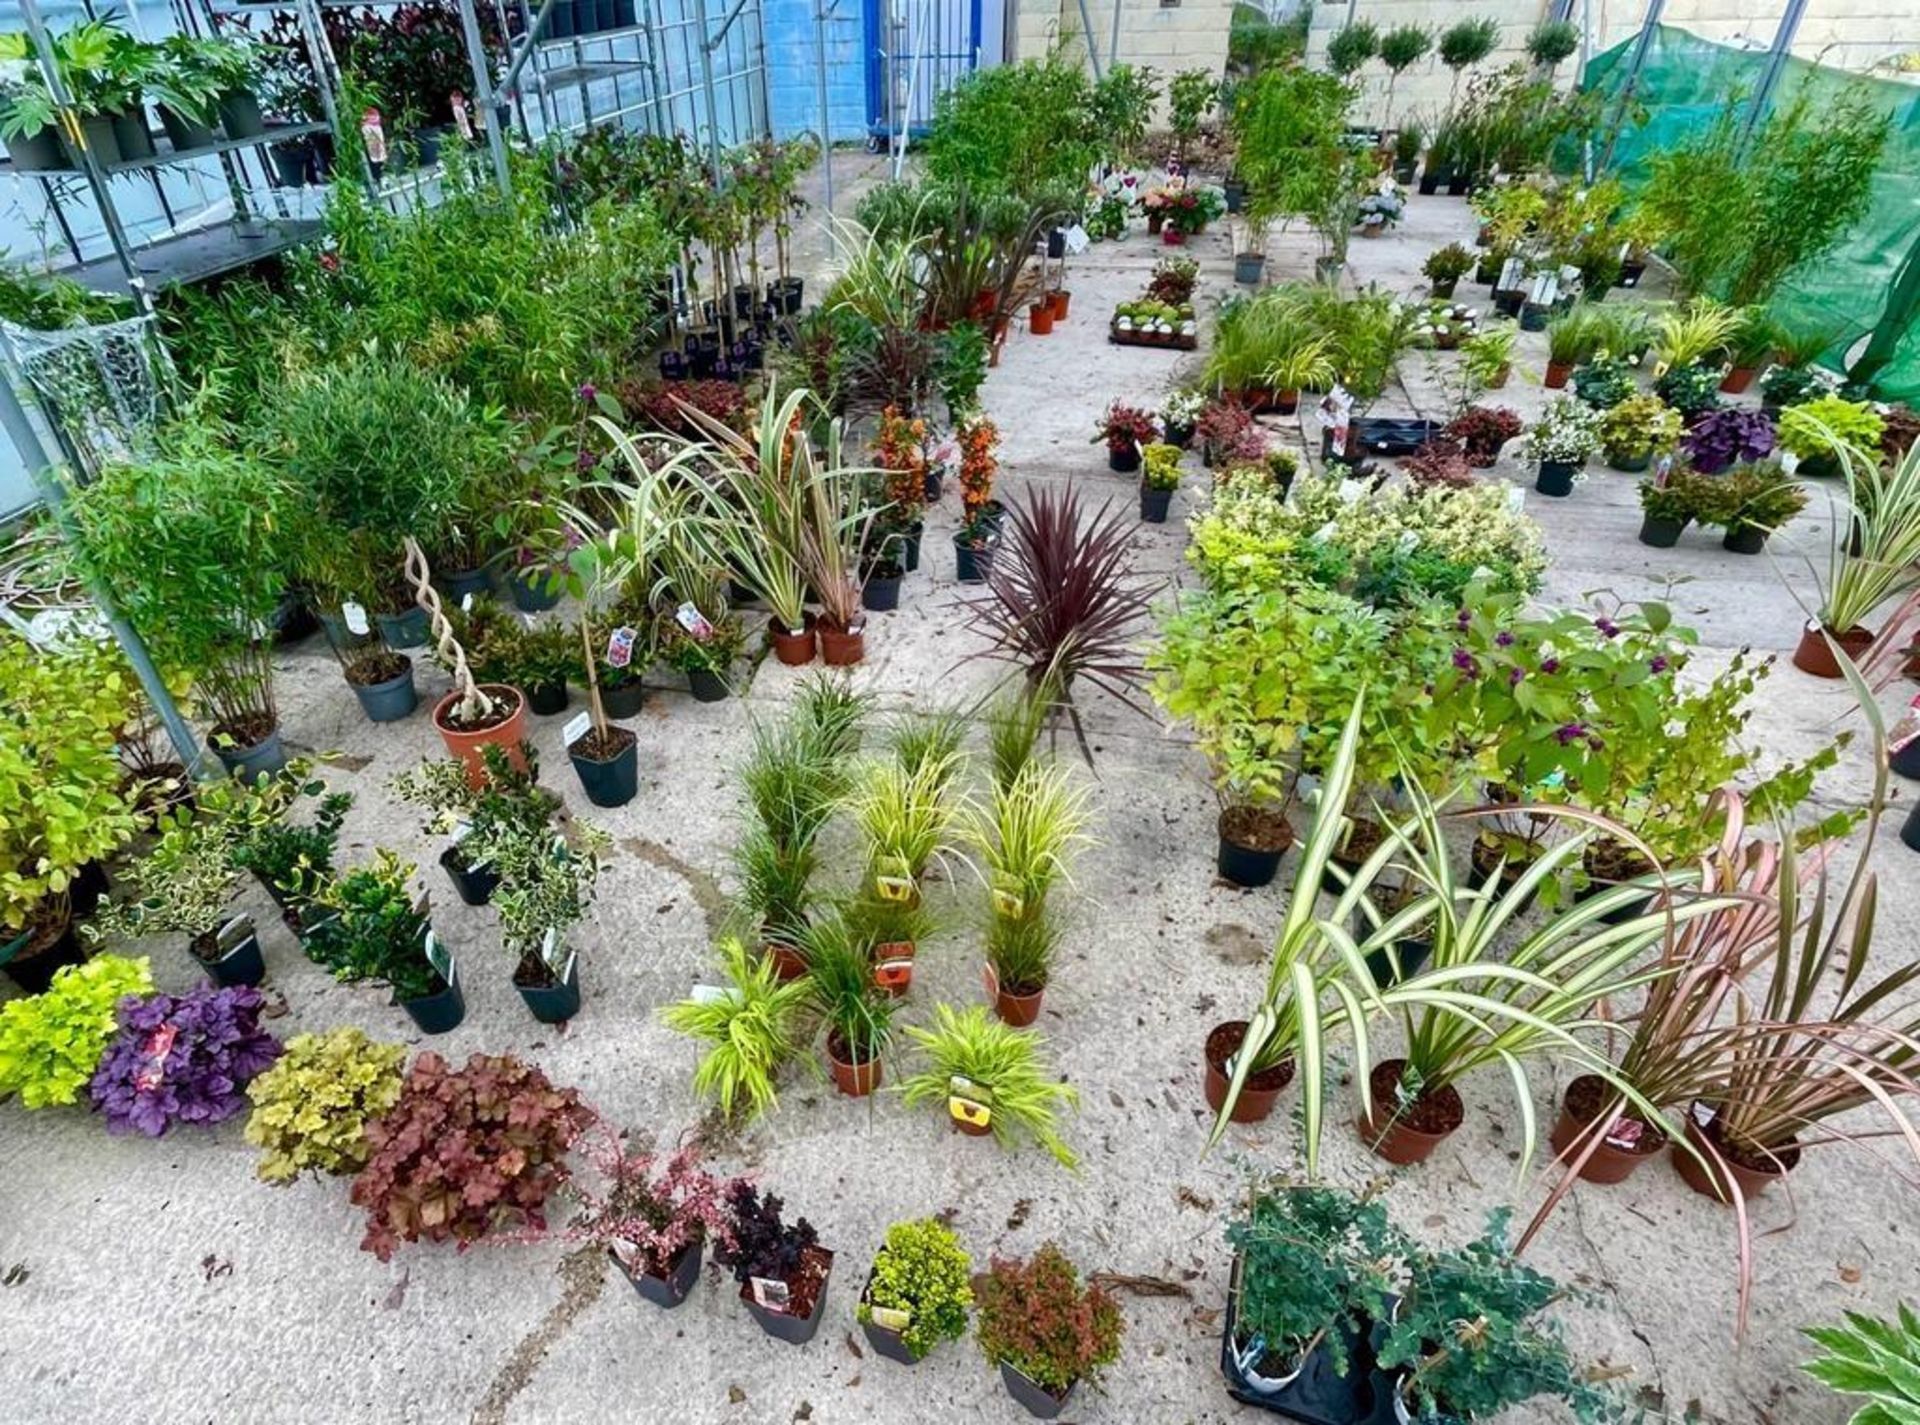 WELCOME TO ASHLEY WALLER HORTICULTURE AUCTION LOTS BEING ADDED DAILY